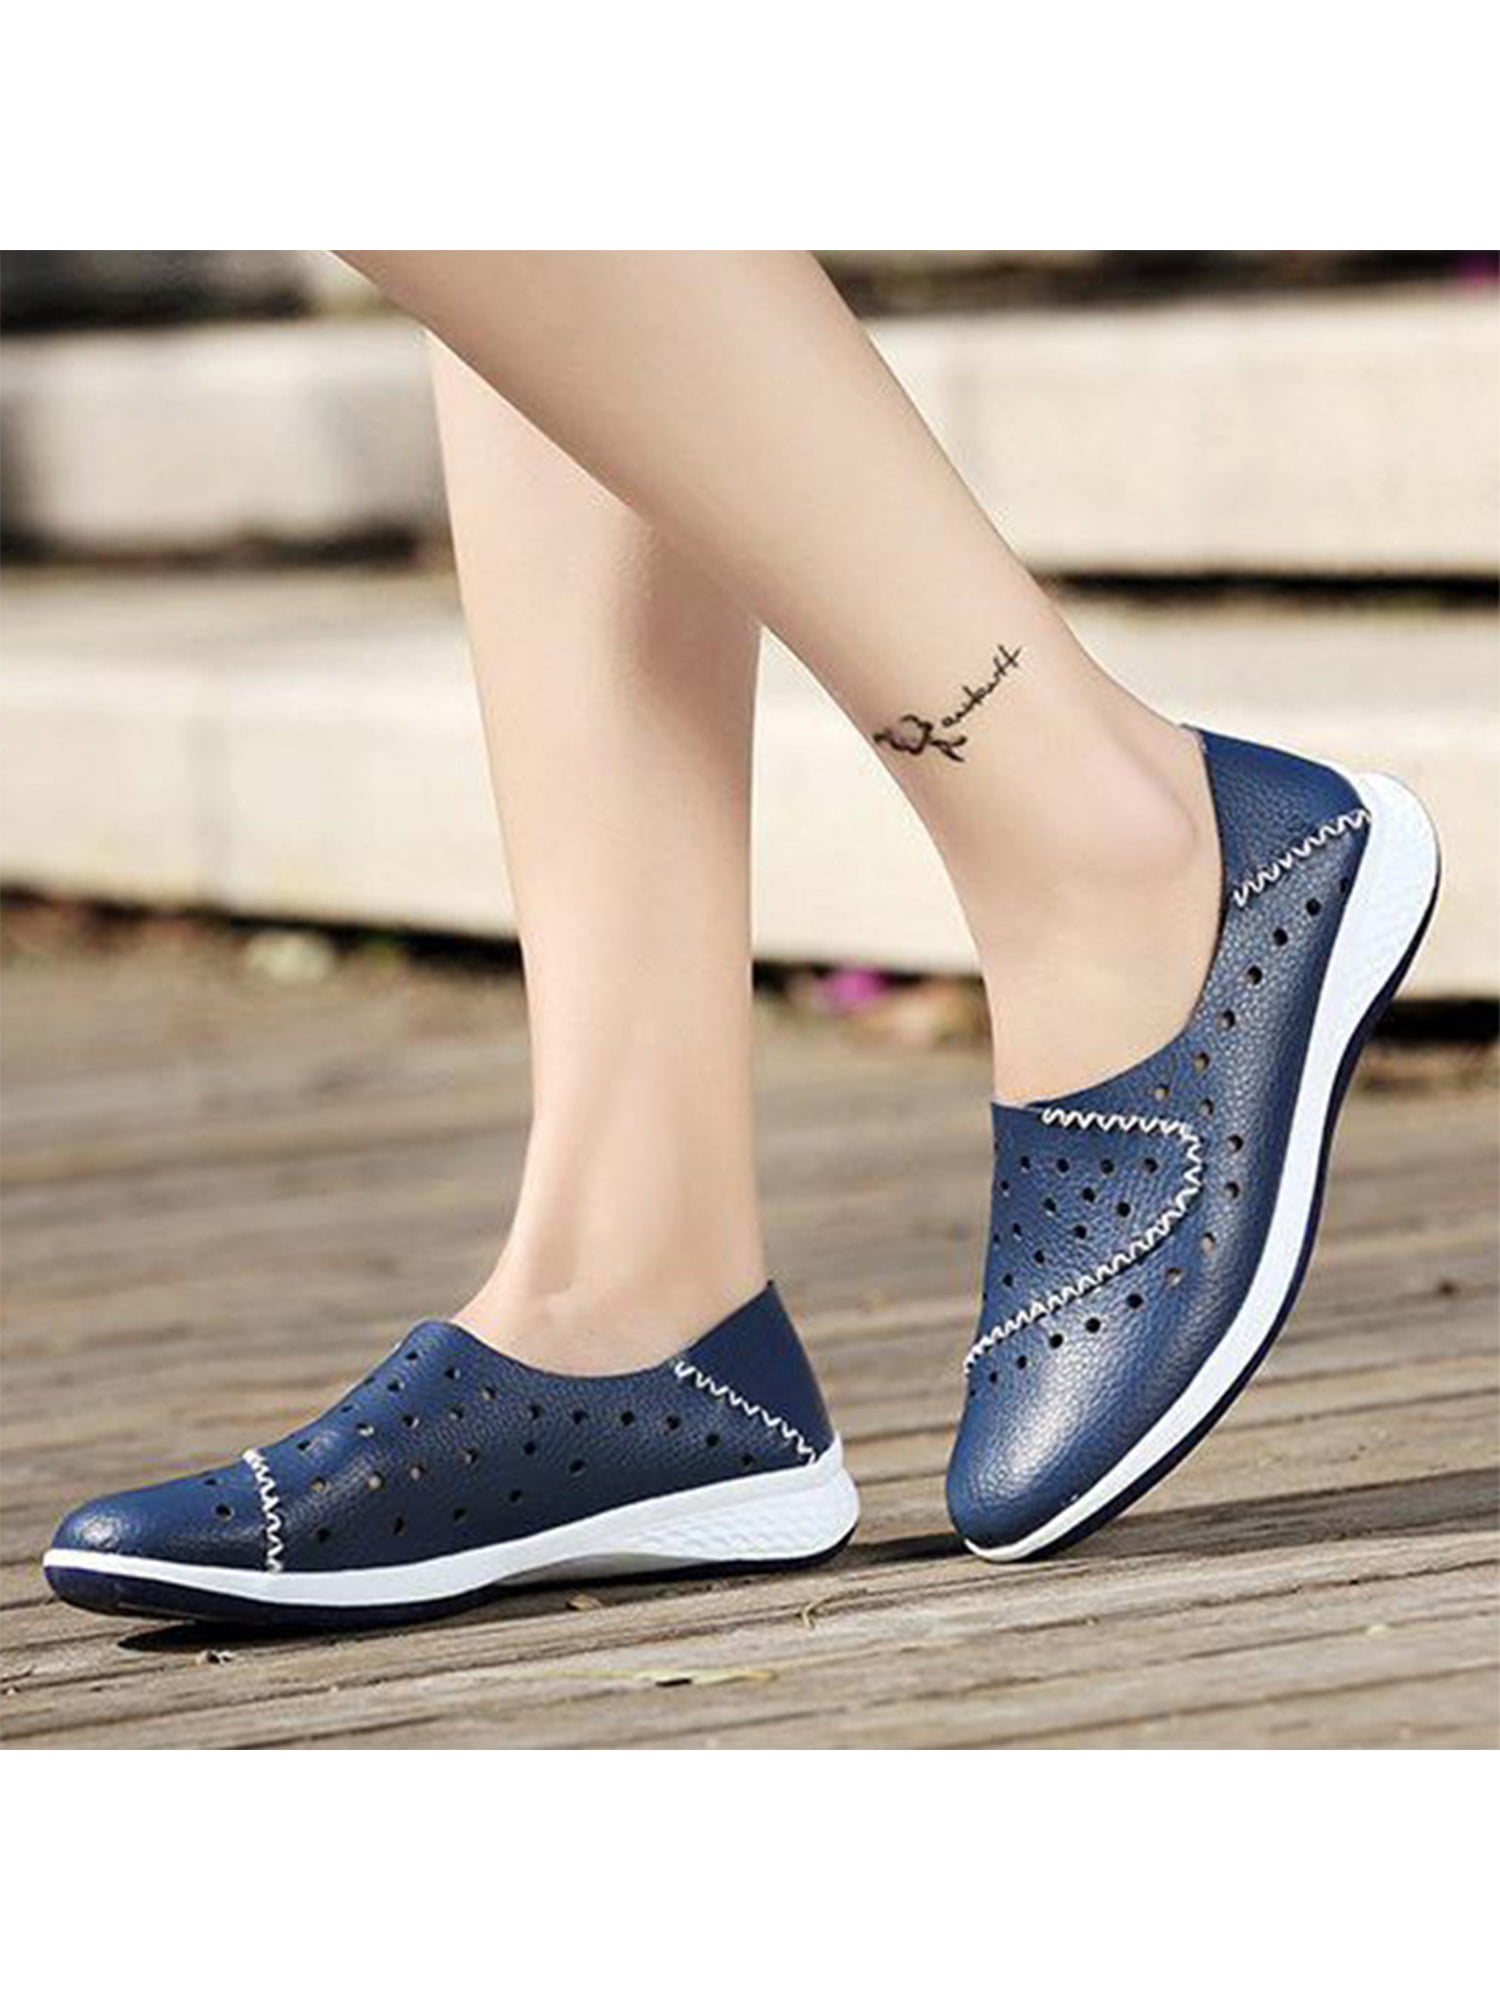 Fashion Women's Moccasins Loafers Wedge Heels Hollow out Slip on Casual Shoes SZ 